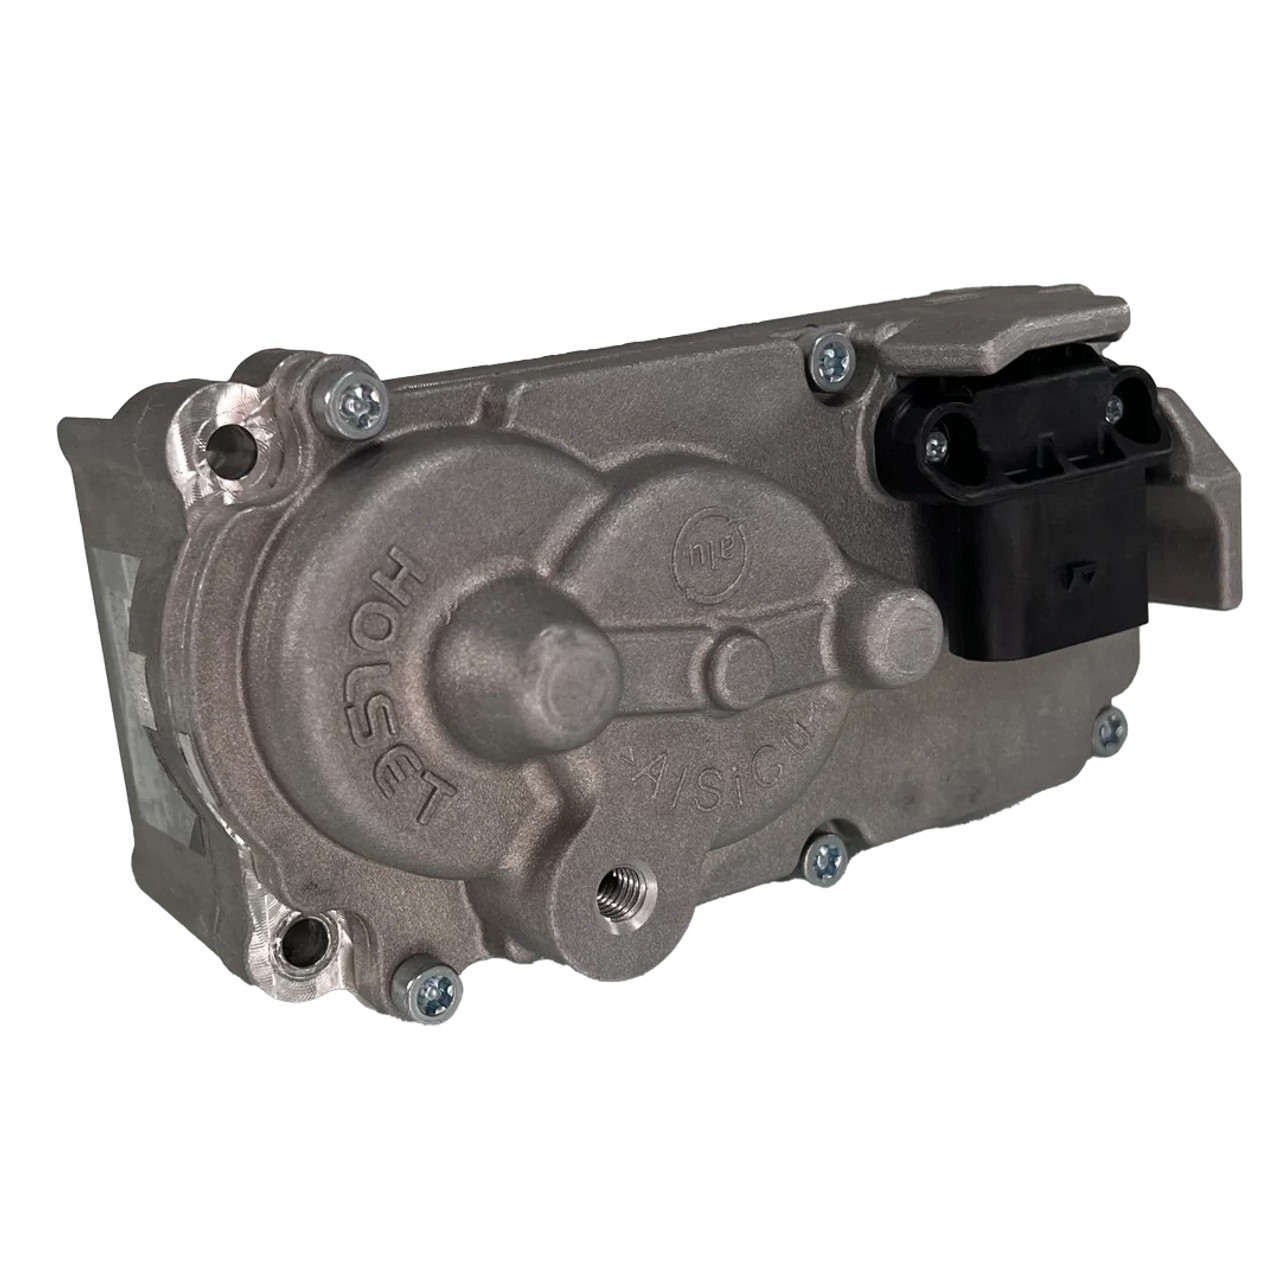 Holset Actuator for 2OO7.5 to 2012 Dodge/Ram 6.7L Cummins (302440) Main View